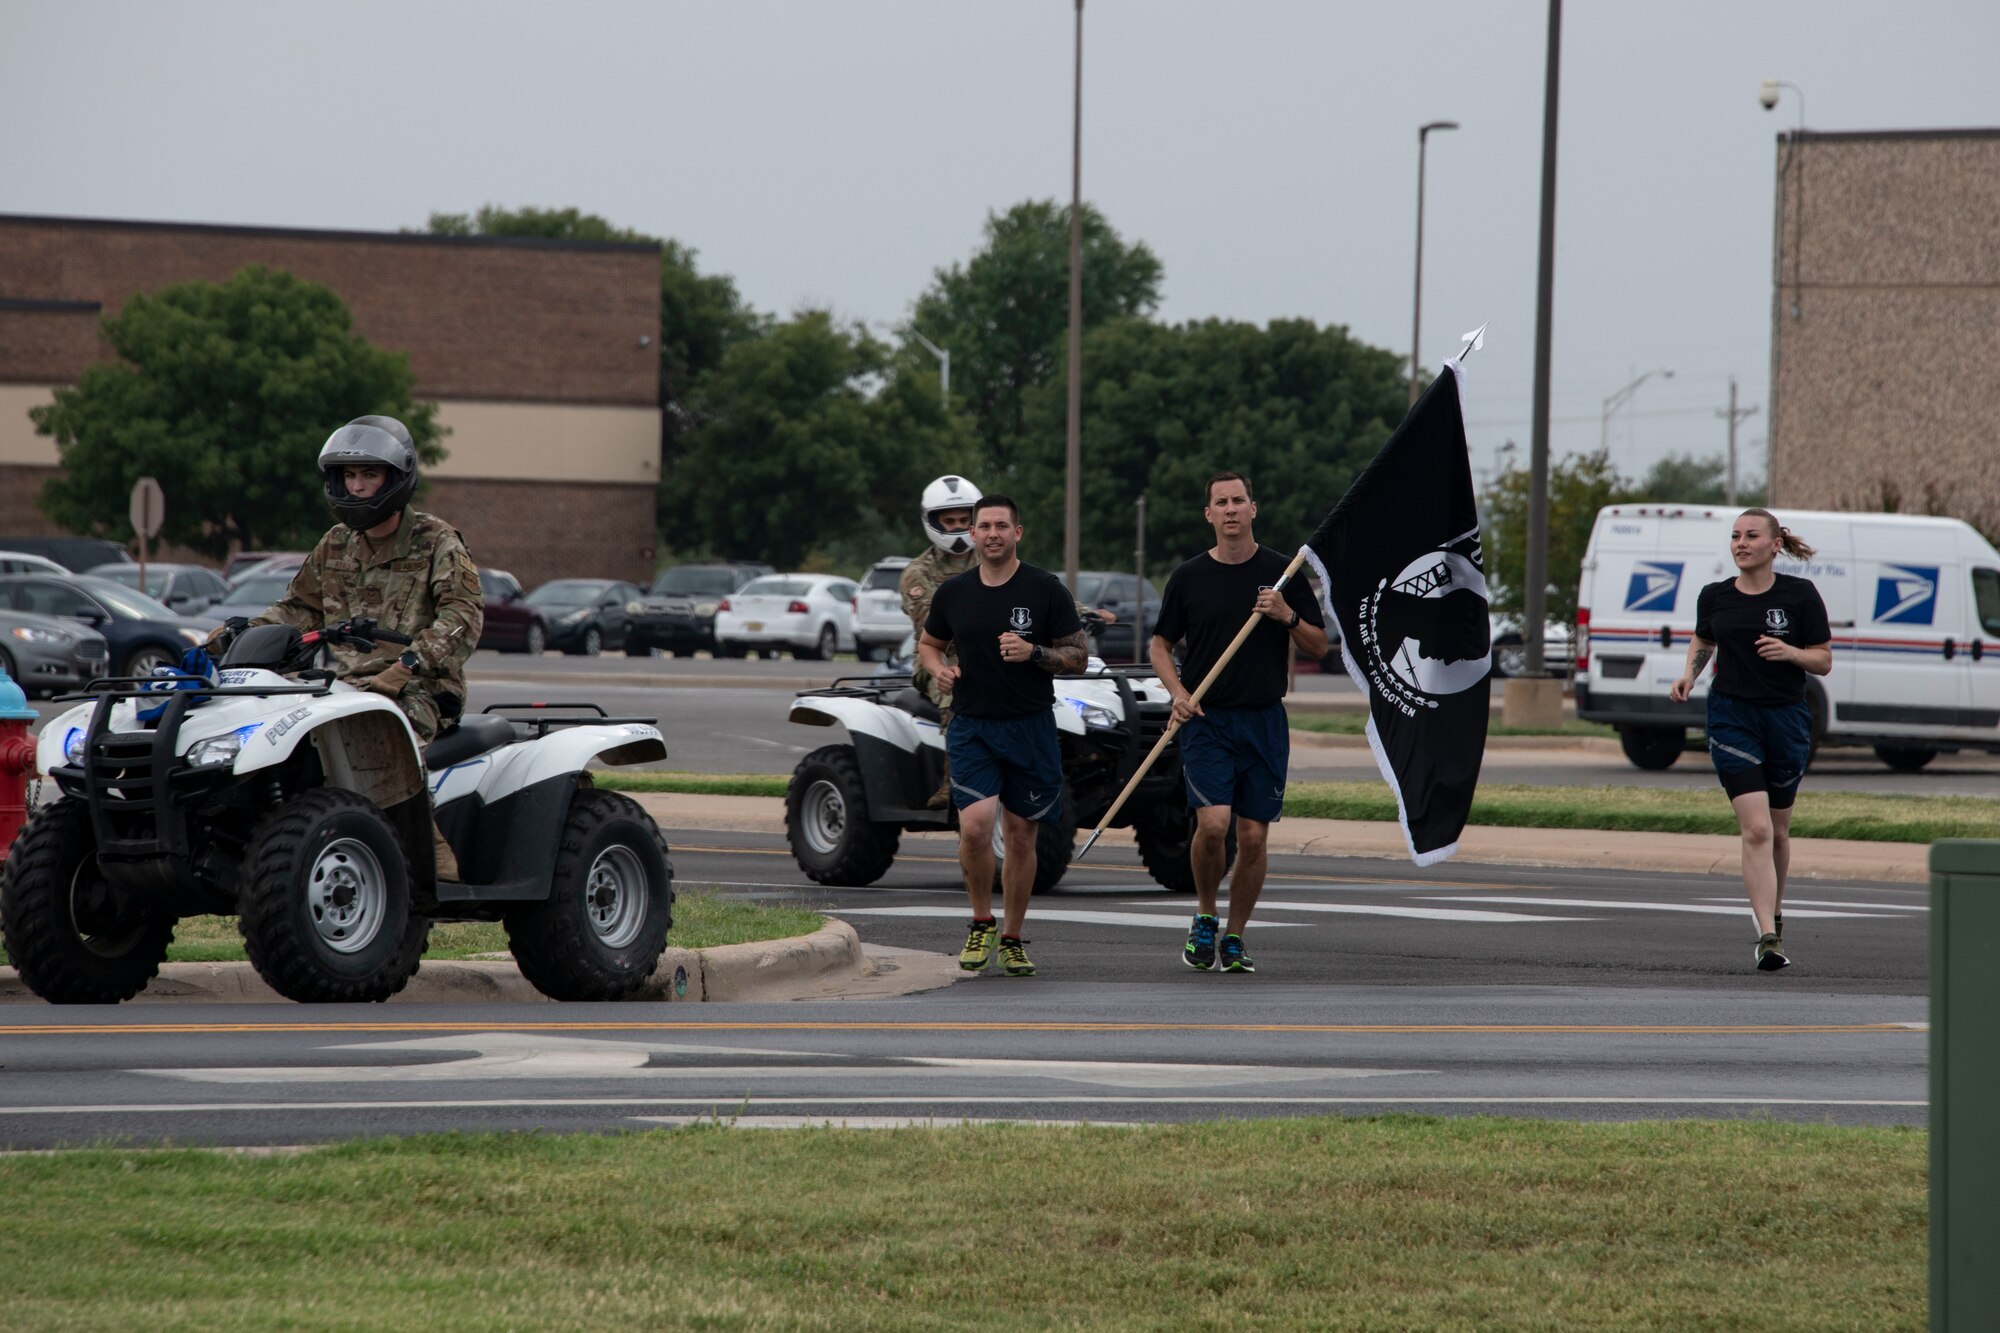 Members of Altus Warrior 5/6 council bring the POW/MIA flag to Wings of Freedom Park to officially end the 24-hour POW/MIA remembrance run